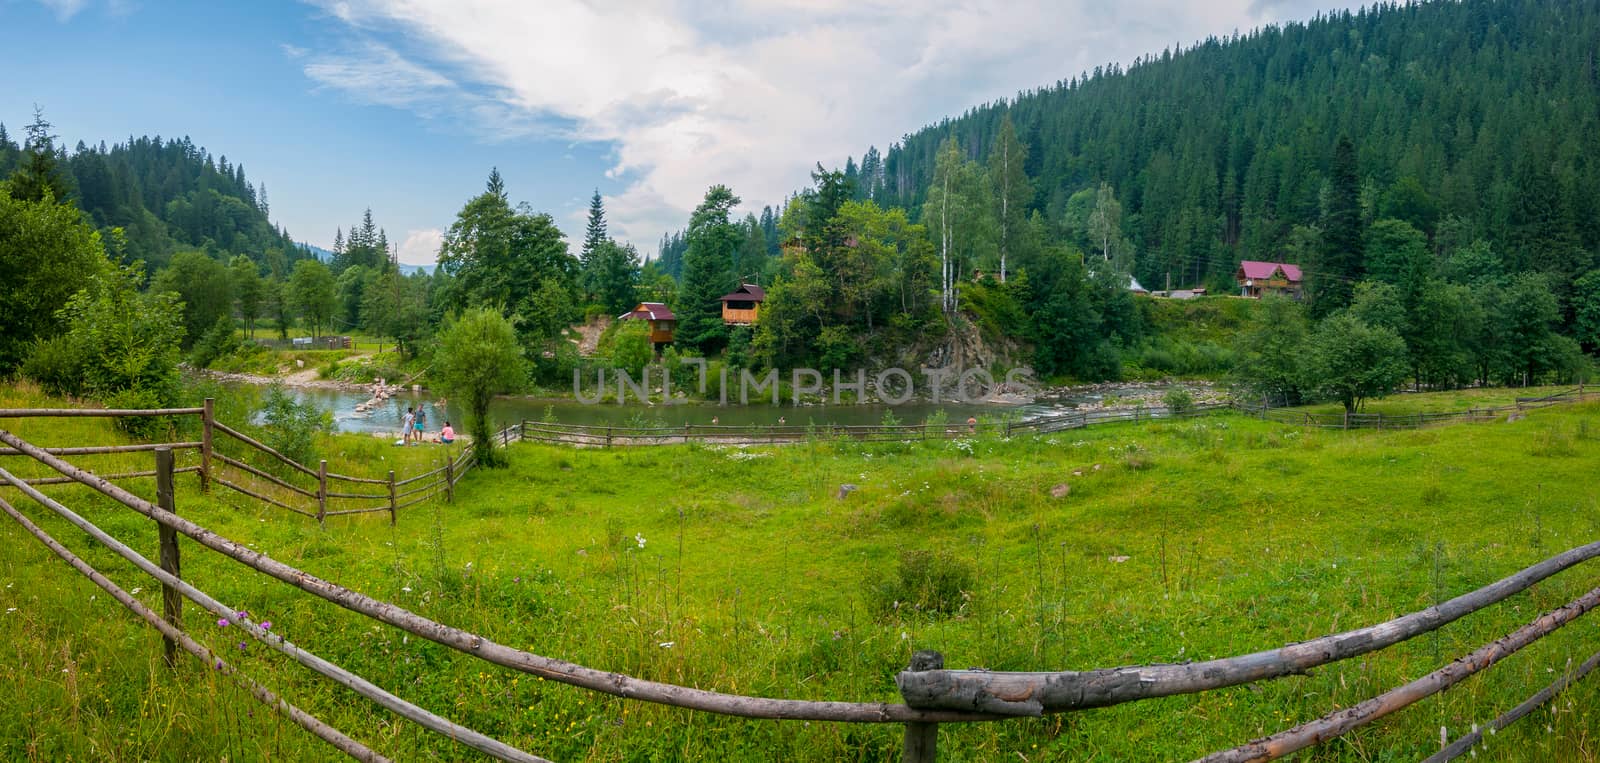 Beautiful views of the mountainous terrain with the current river between the low banks with green grass on one side and trees and houses on the other. by Adamchuk